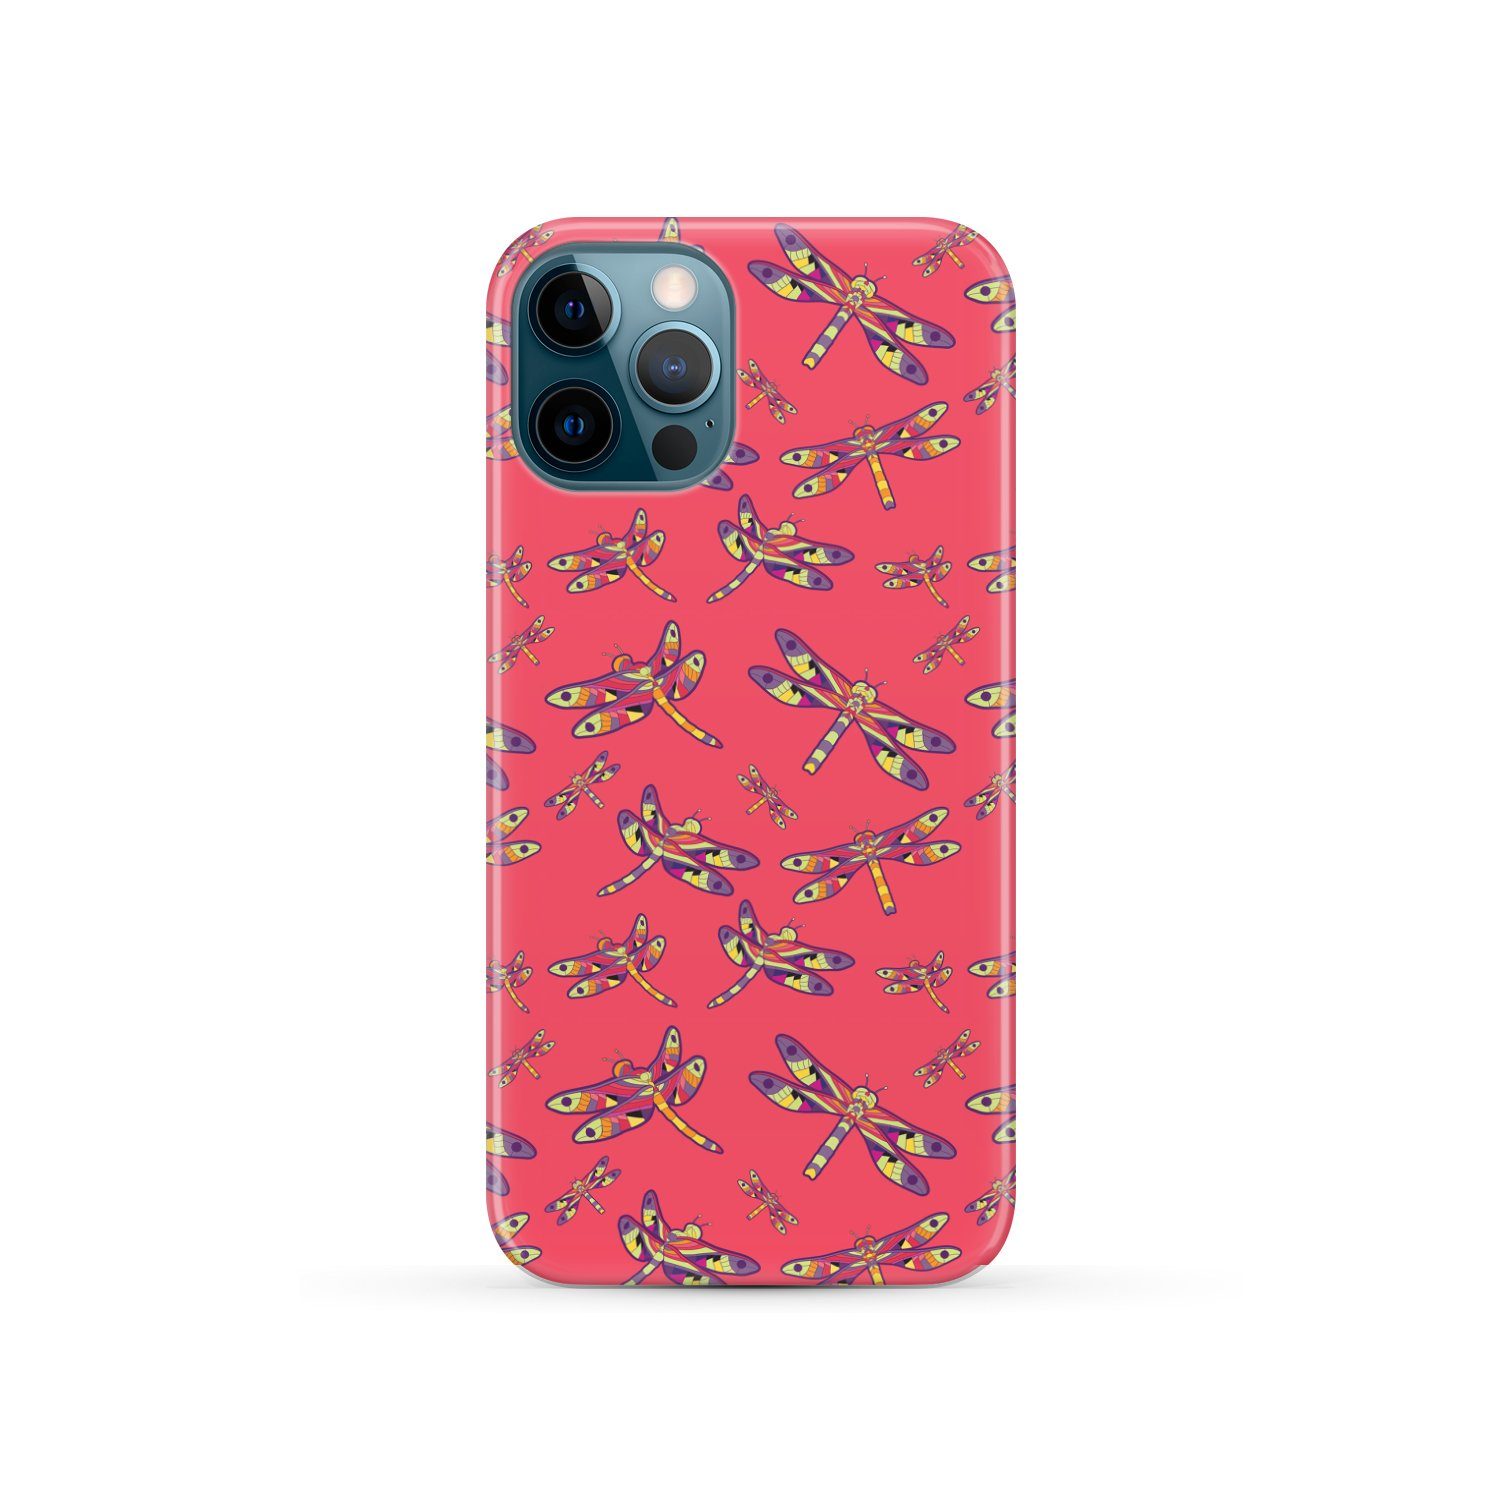 The Gathering Phone Case Phone Case wc-fulfillment iPhone 12 Pro 